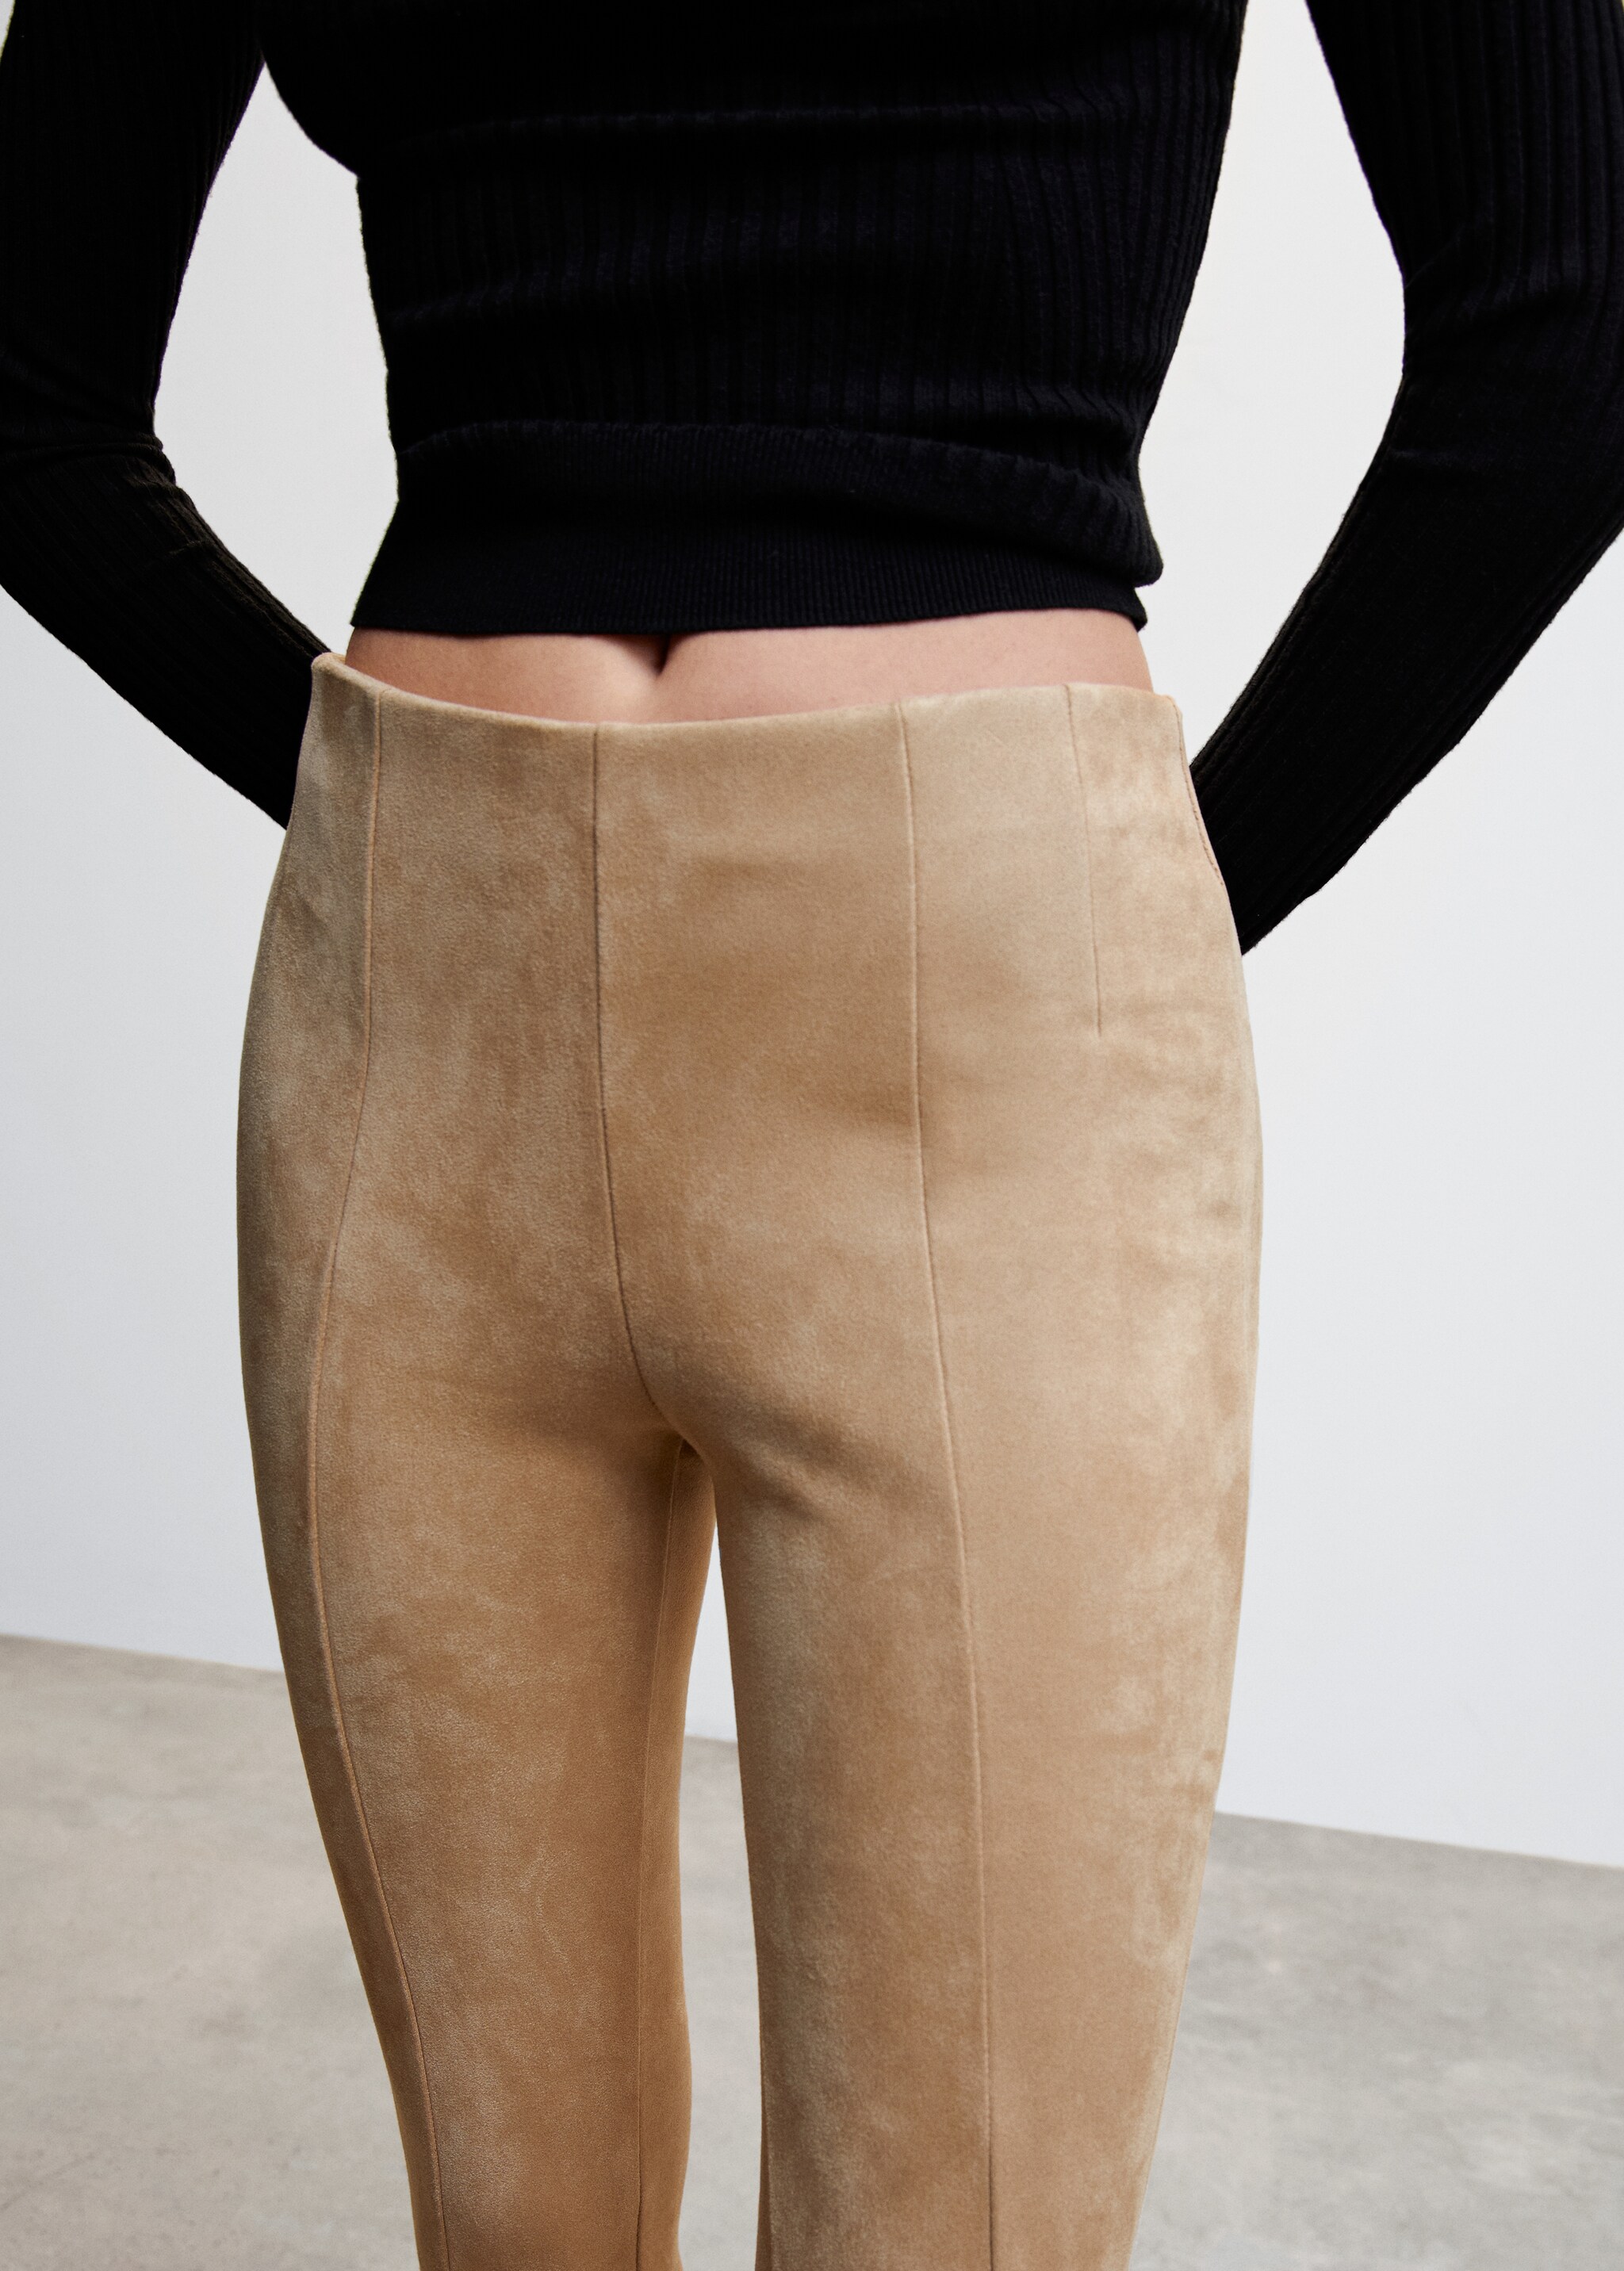 Suede leggings - Details of the article 6